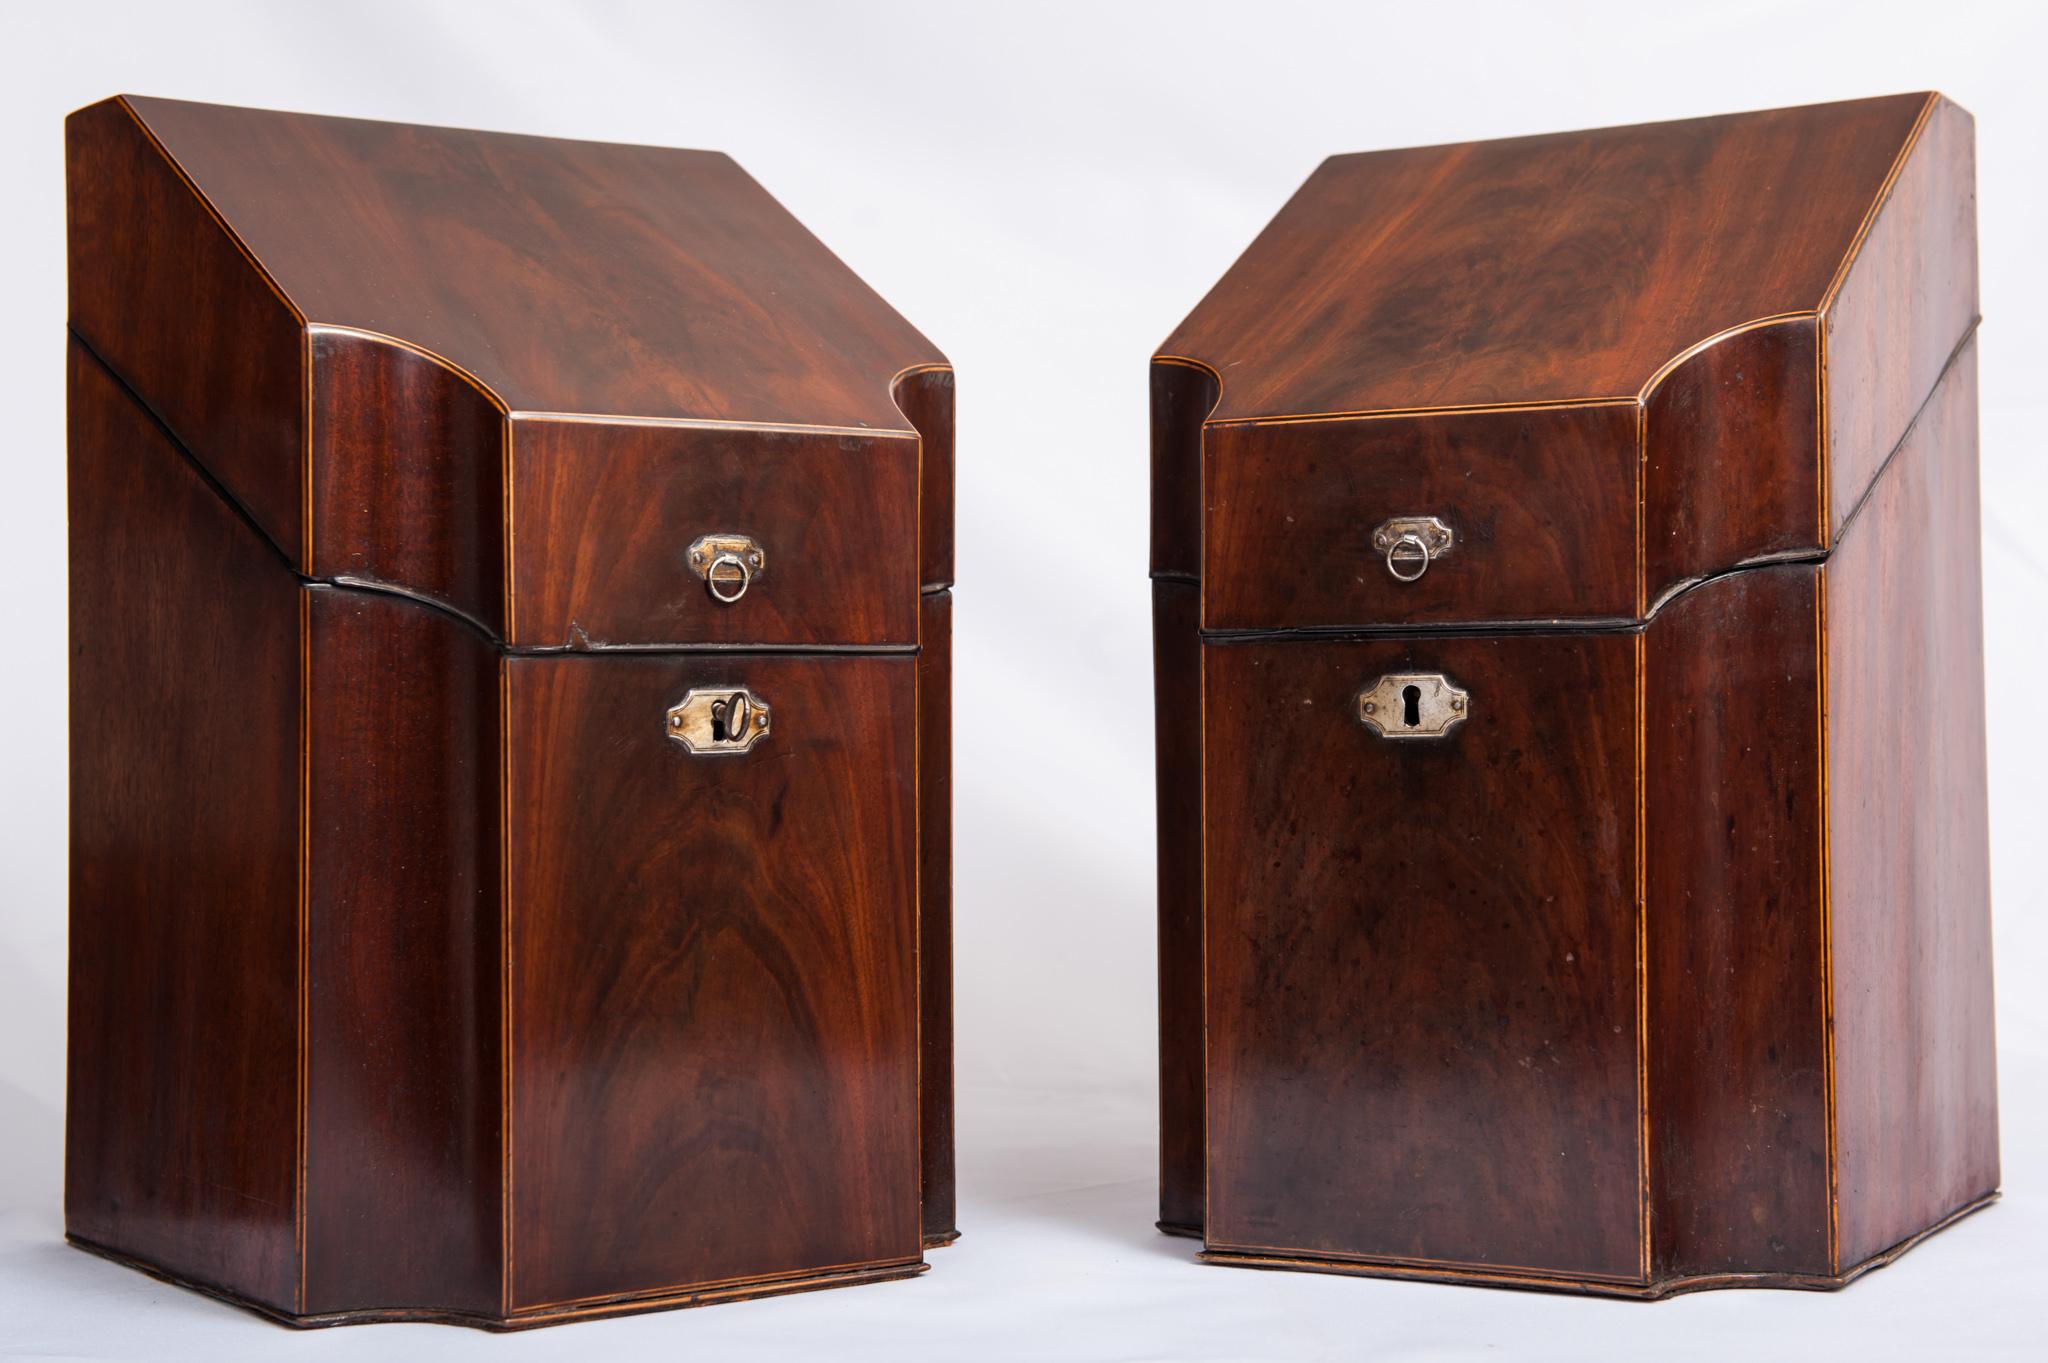 Hepplewhite Exceptional Pair of cutlery cases georgian mahogany silver mounts original For Sale